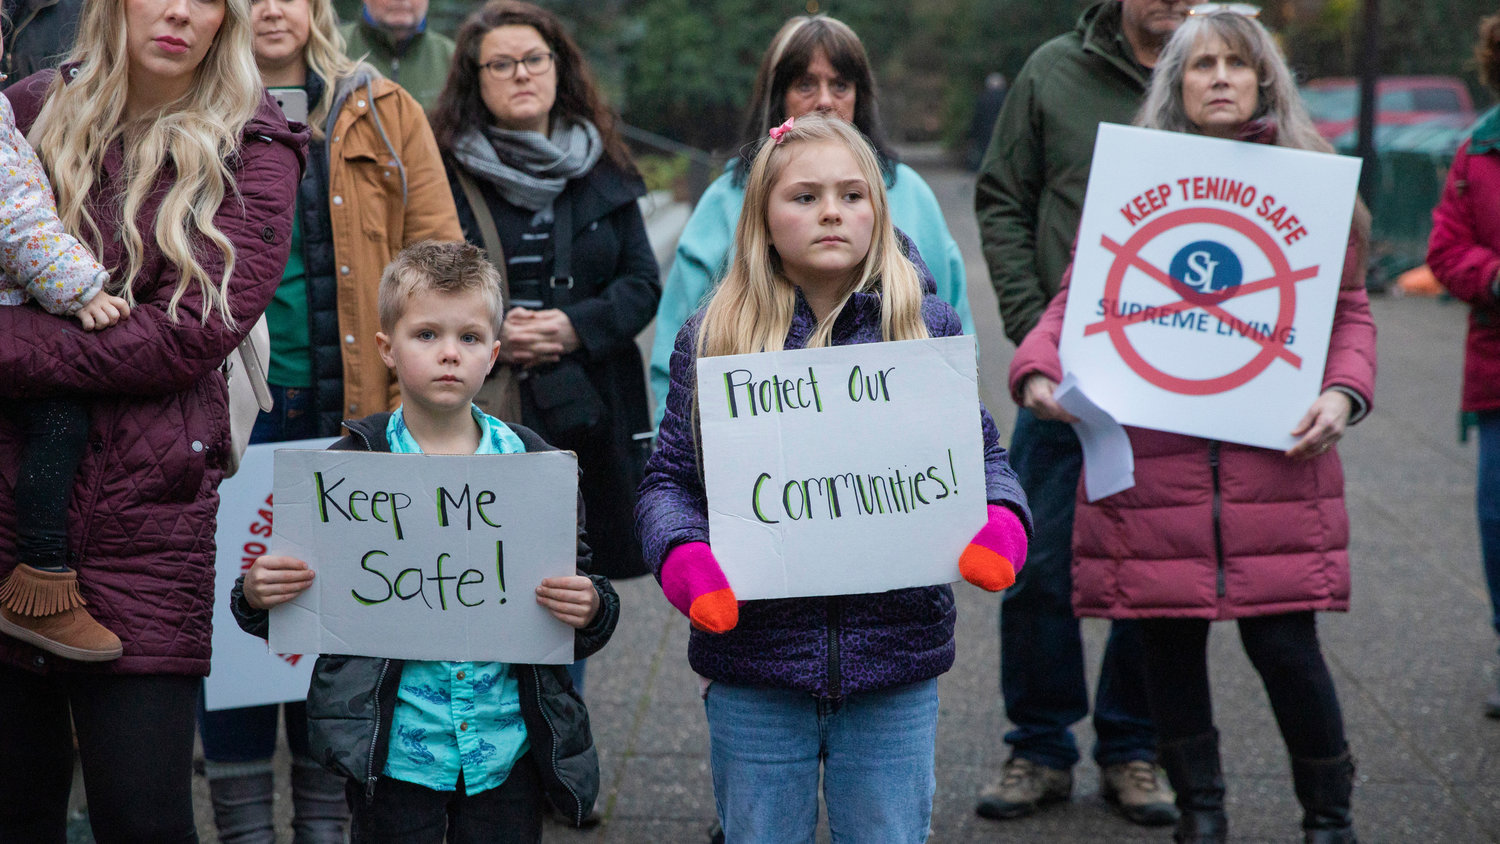 Kids hold signs while standing with Tenino residents against Supreme Living outside the Washington State Capitol Building in Olympia on Thursday.